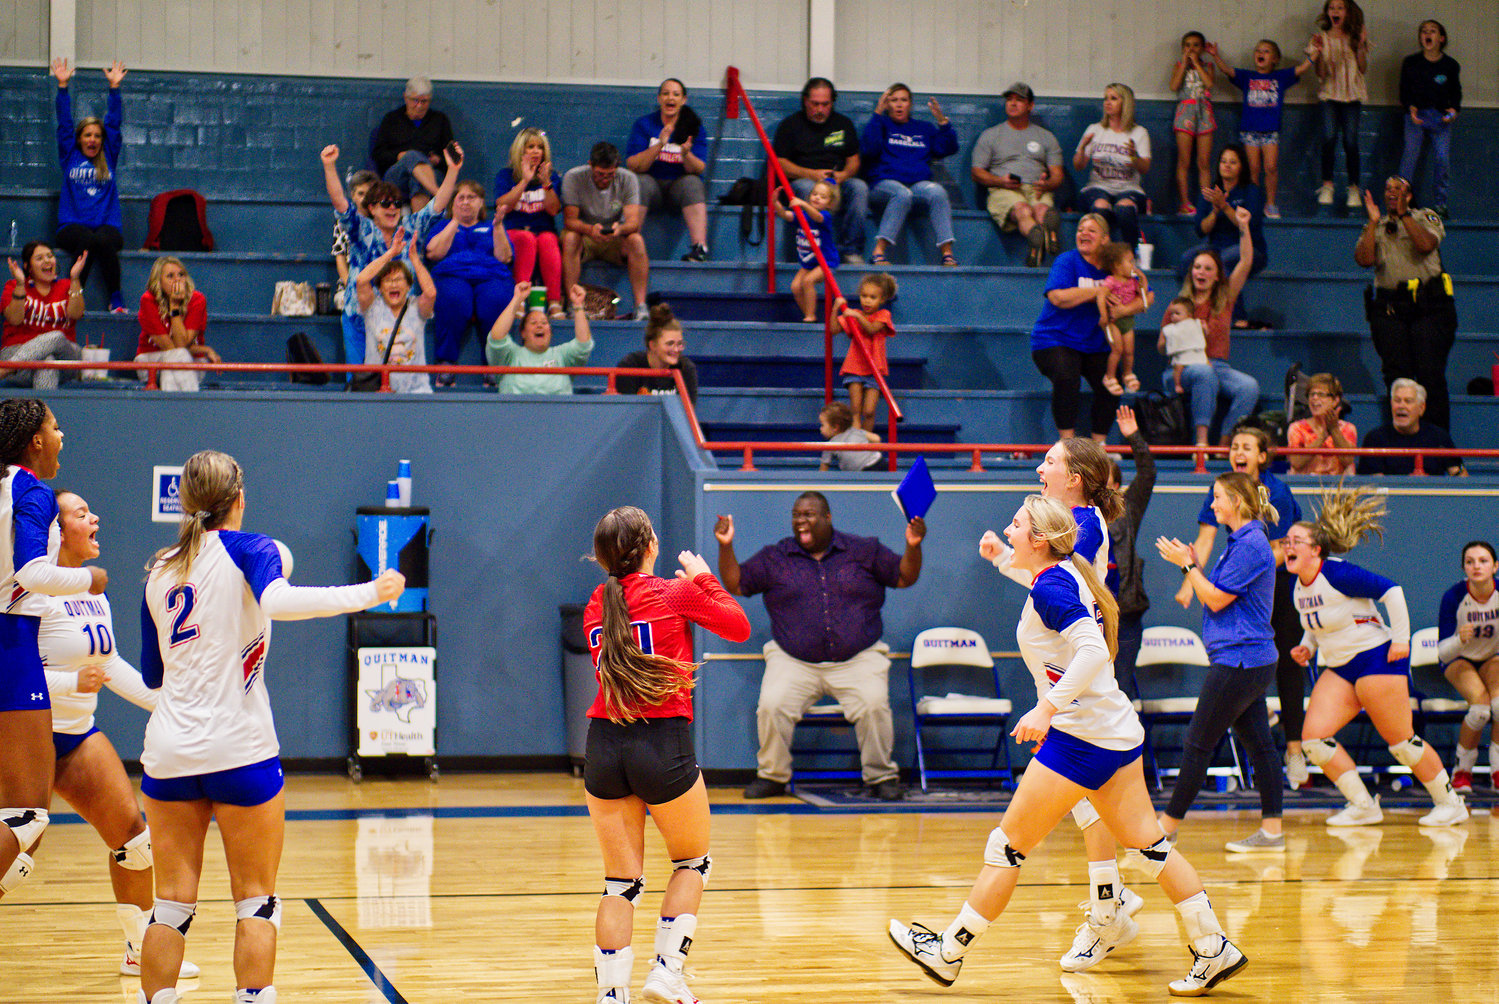 There were plenty of cheers and smiles last week as the Quitman Lady Bulldogs recorded their first win. [view more volleyball shots]